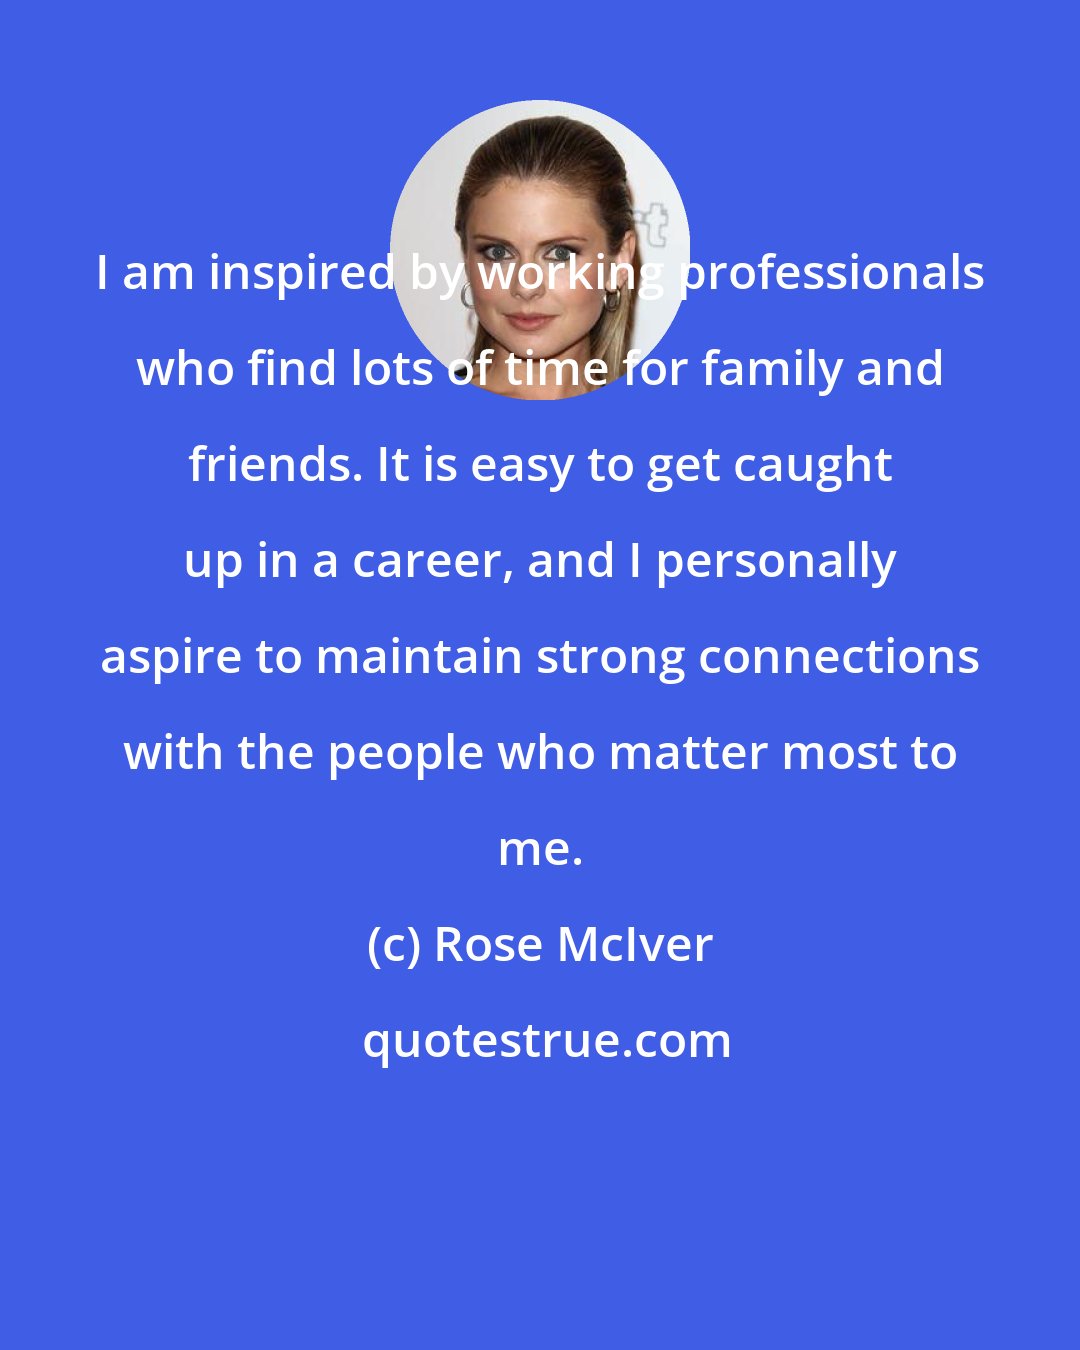 Rose McIver: I am inspired by working professionals who find lots of time for family and friends. It is easy to get caught up in a career, and I personally aspire to maintain strong connections with the people who matter most to me.